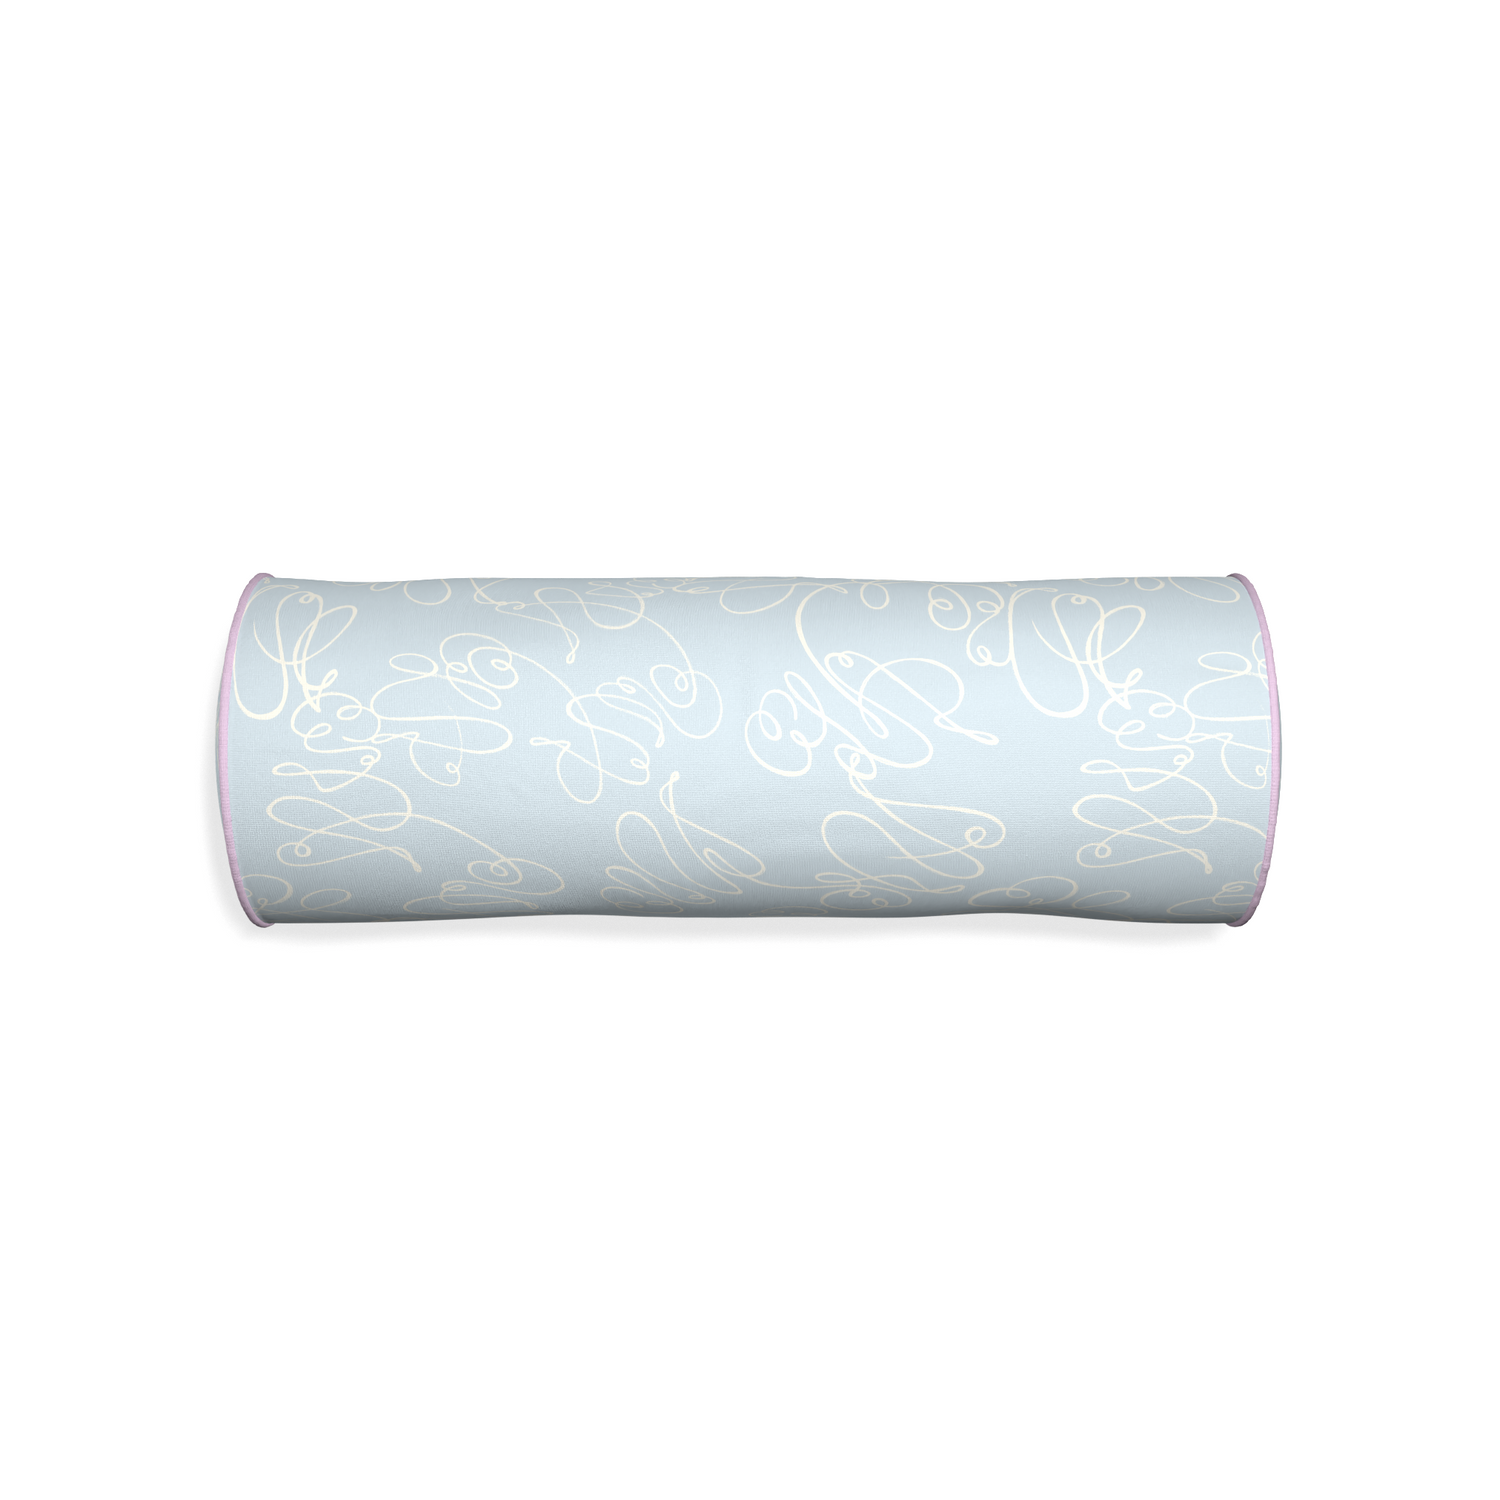 Bolster mirabella custom pillow with l piping on white background